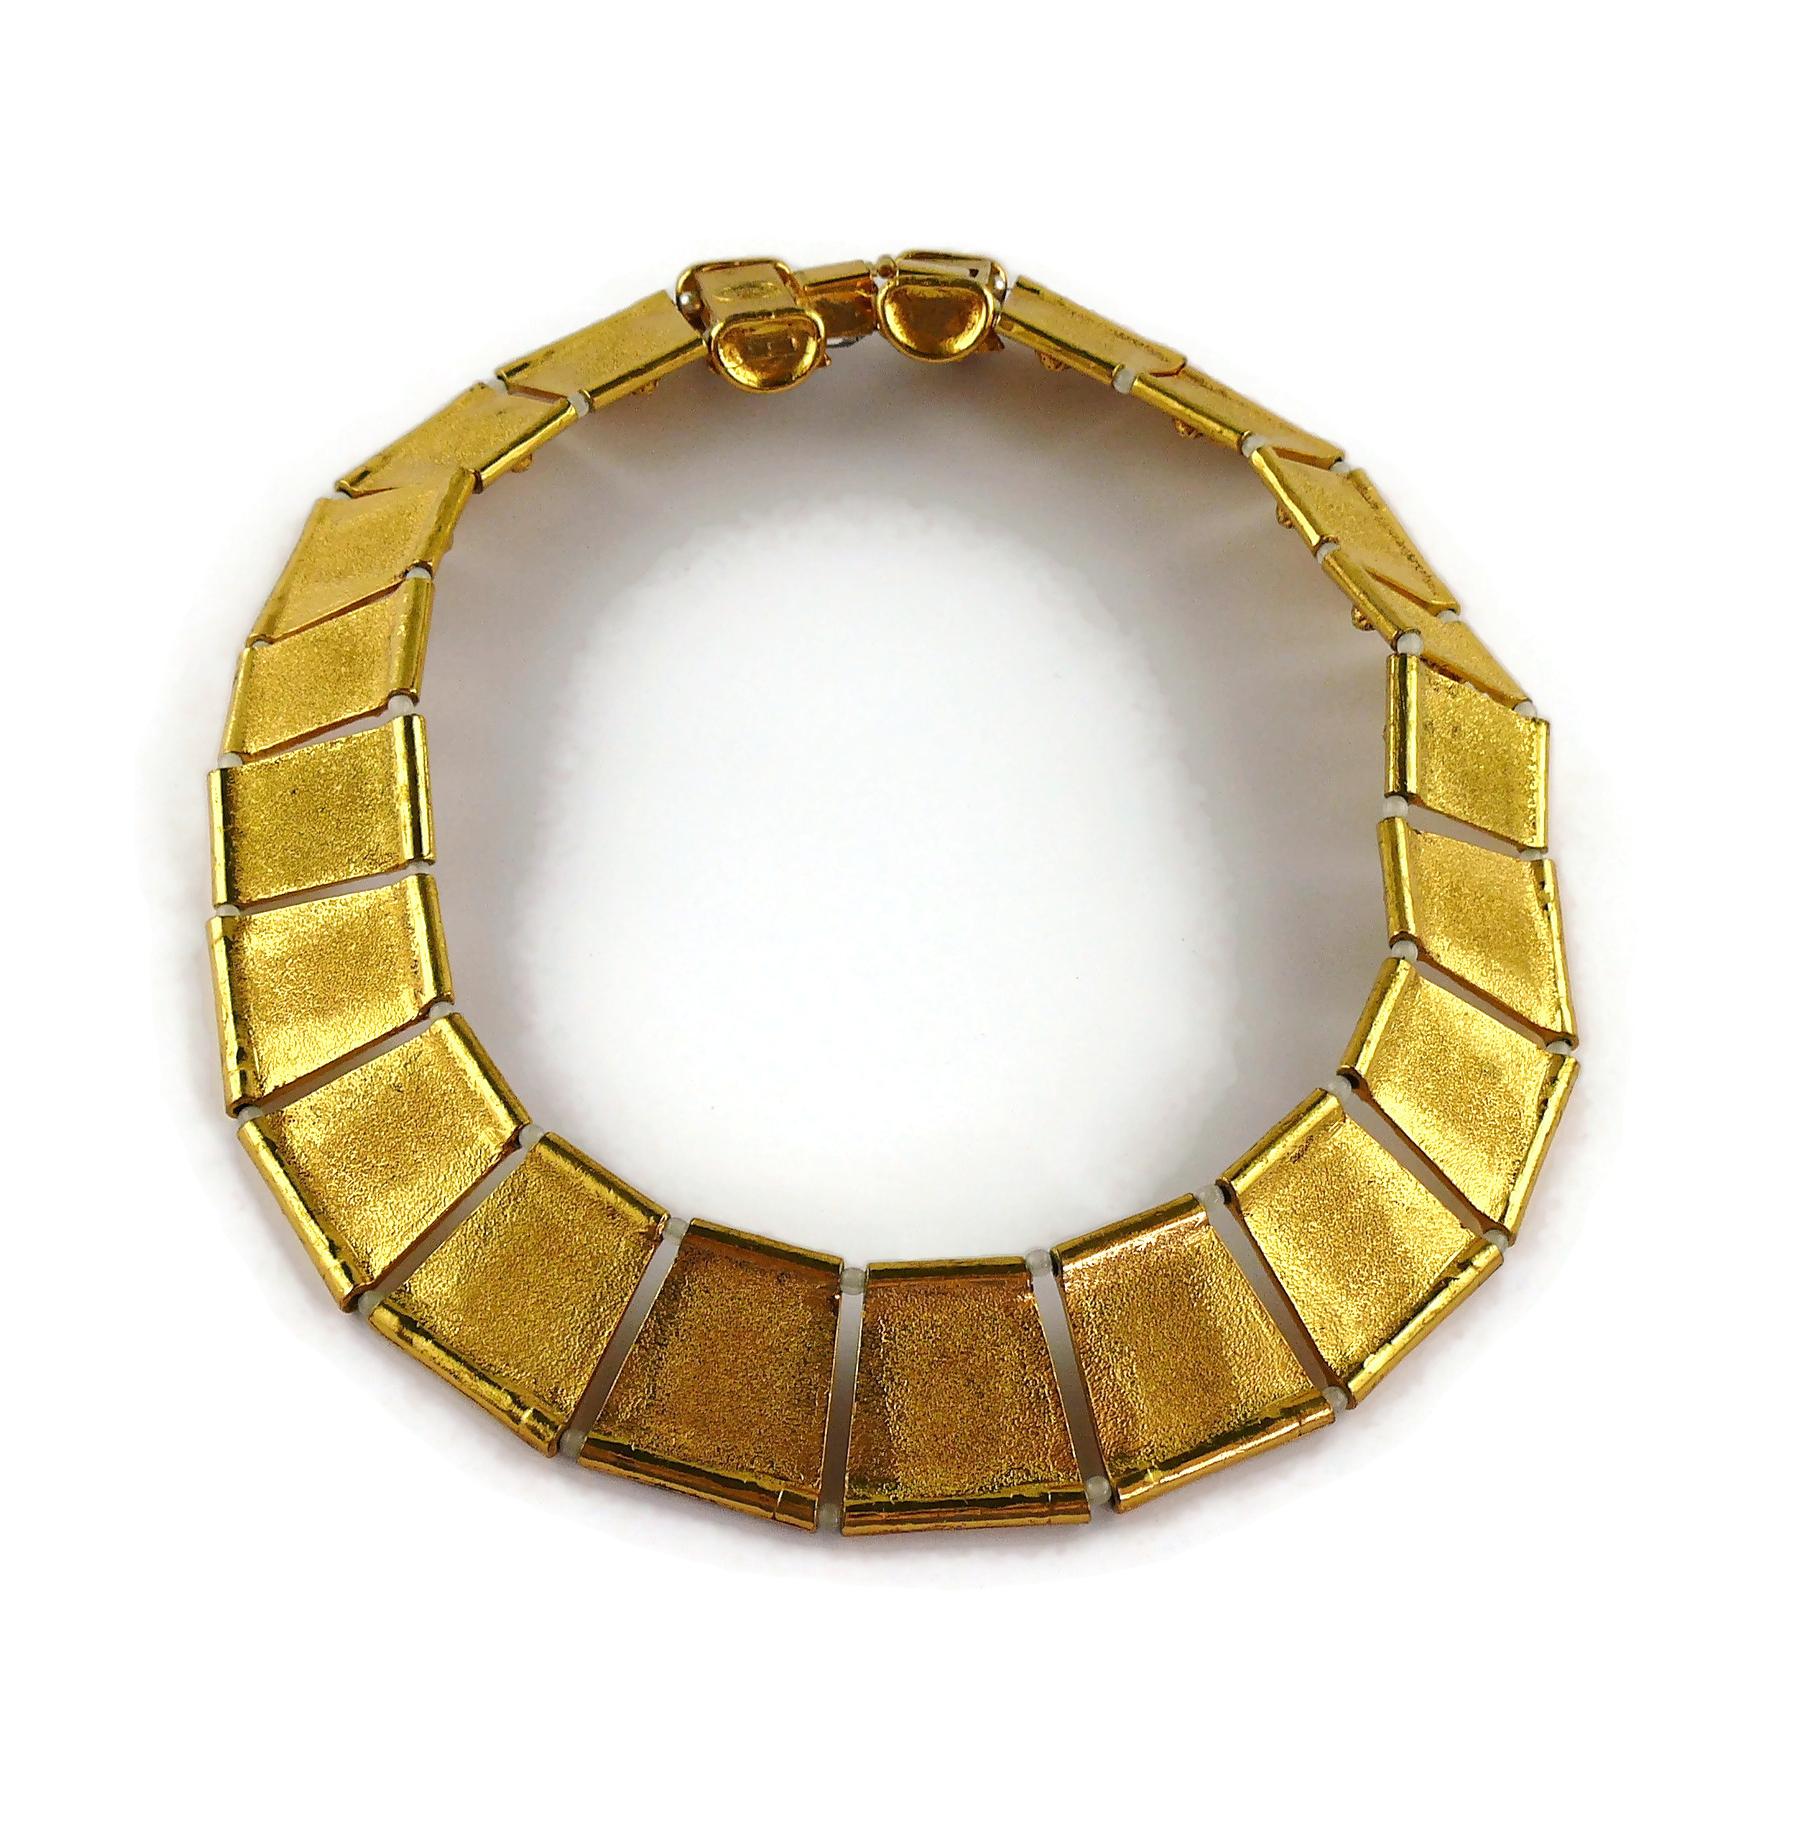 Xavier Loubens Vintage Gold Toned Cupid Collar Necklace For Sale 4